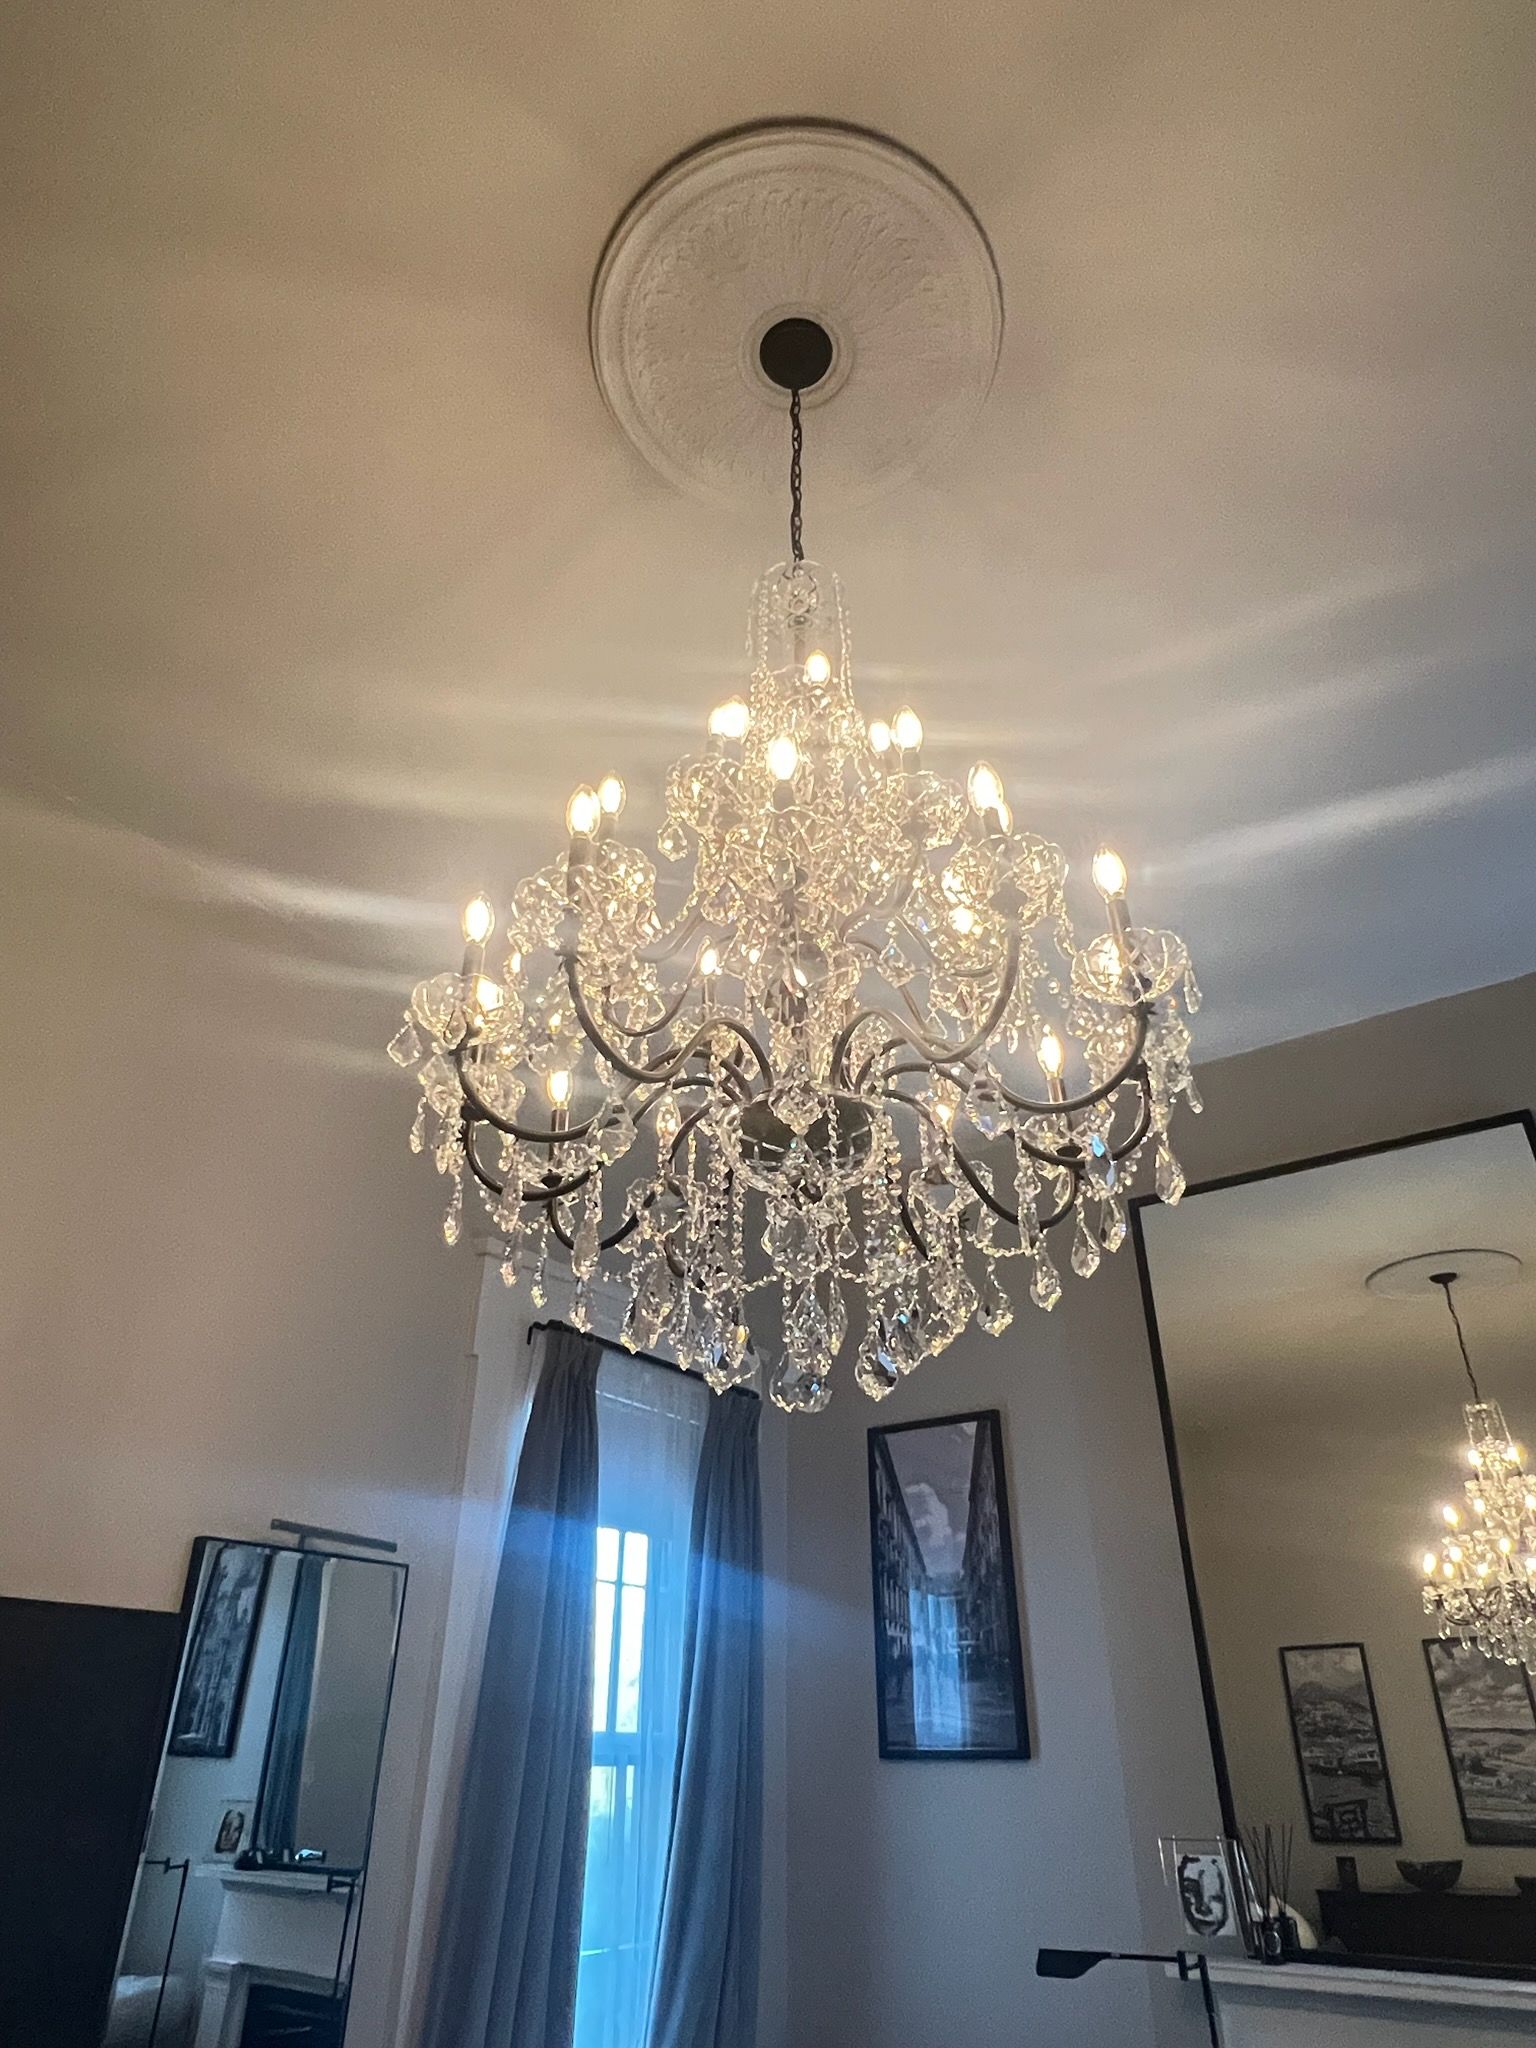 A large chandelier is hanging from the ceiling in a bedroom.